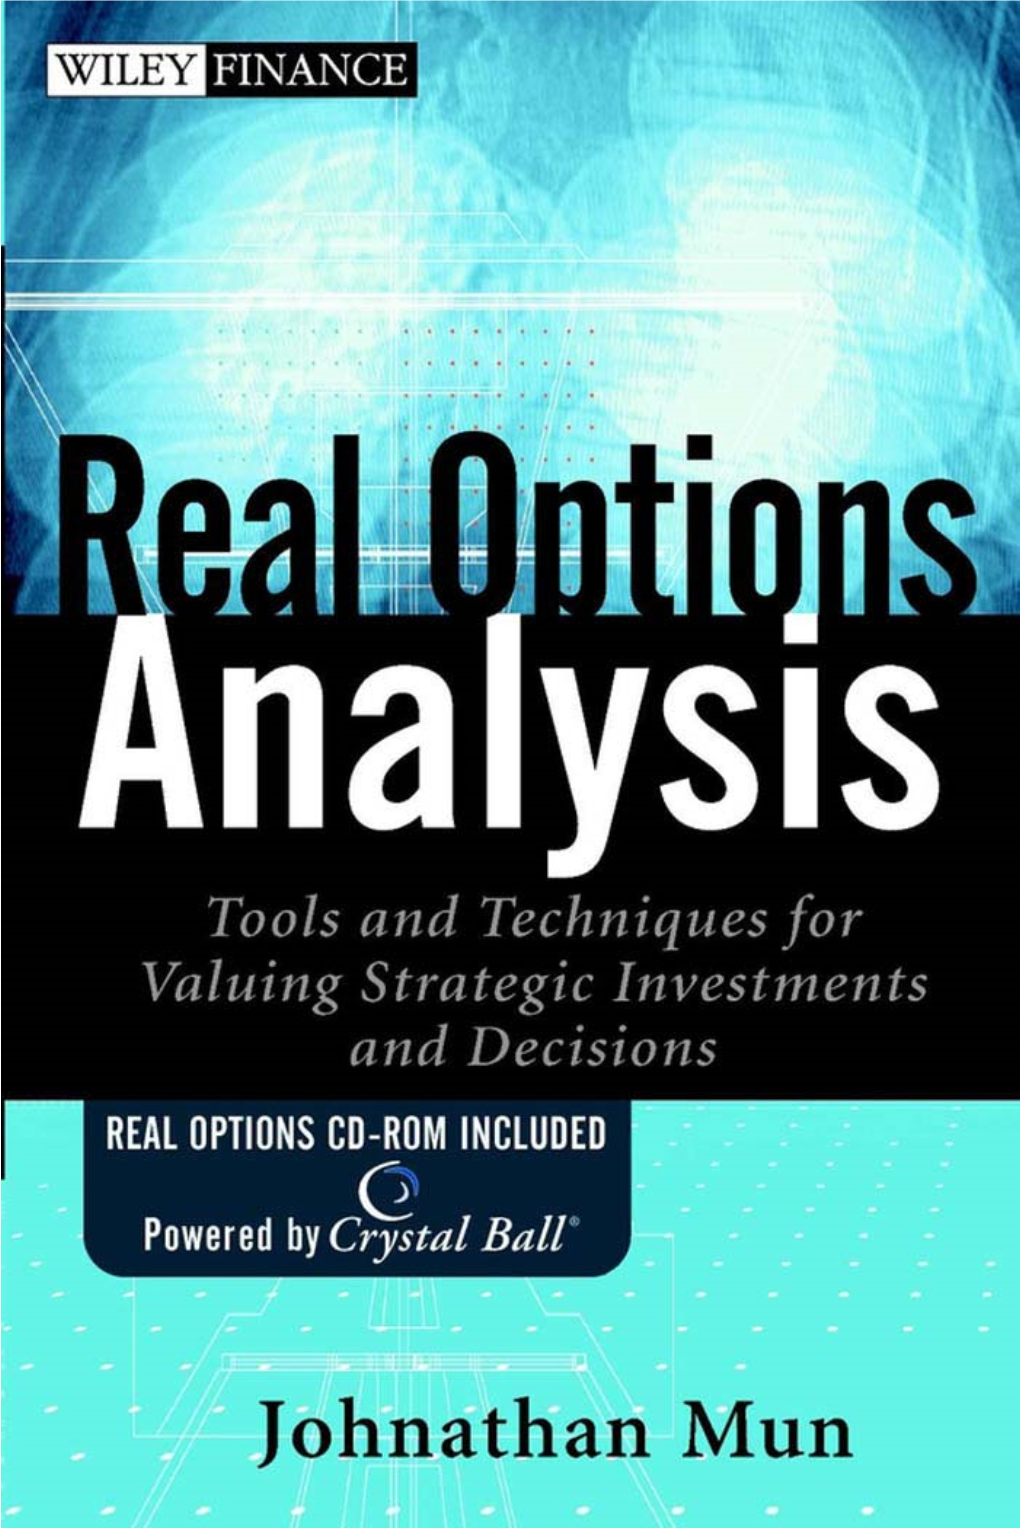 Real Options Analysis Tools and Techniques for Valuing Strategic